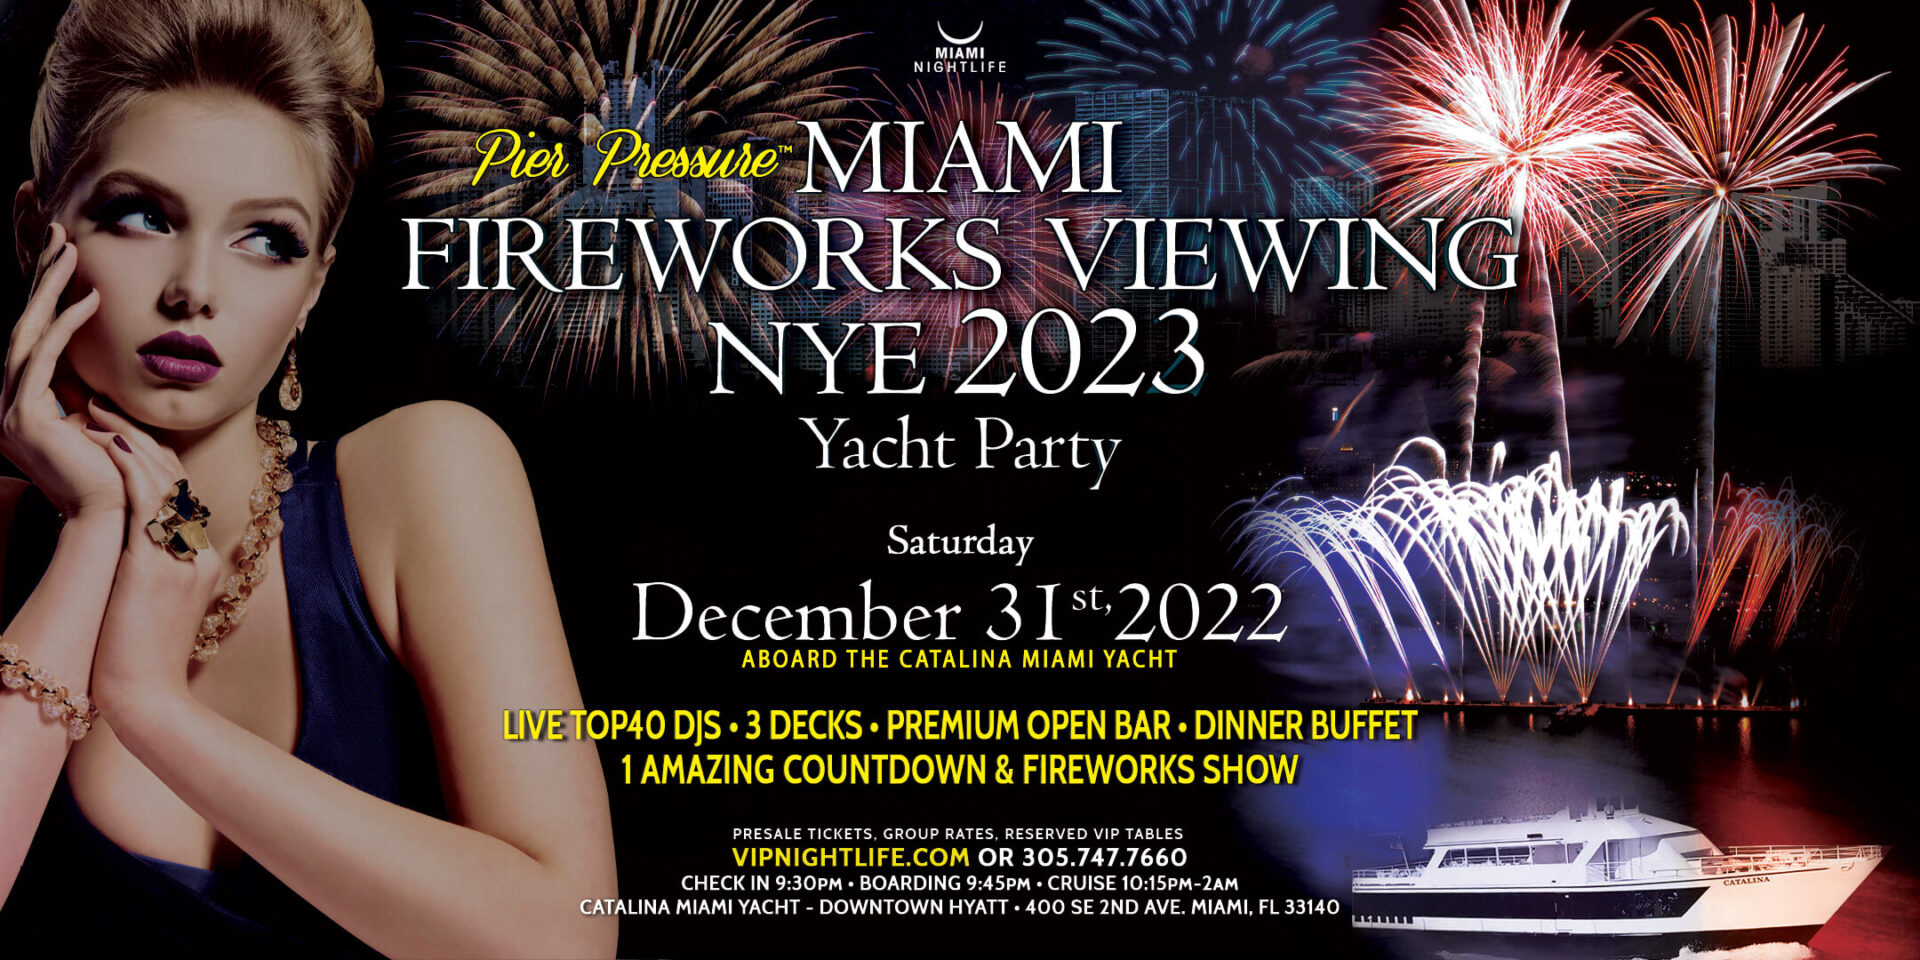 Miami Fireworks Viewing Pier Pressure New Year’s Eve Yacht Party 2023 ...